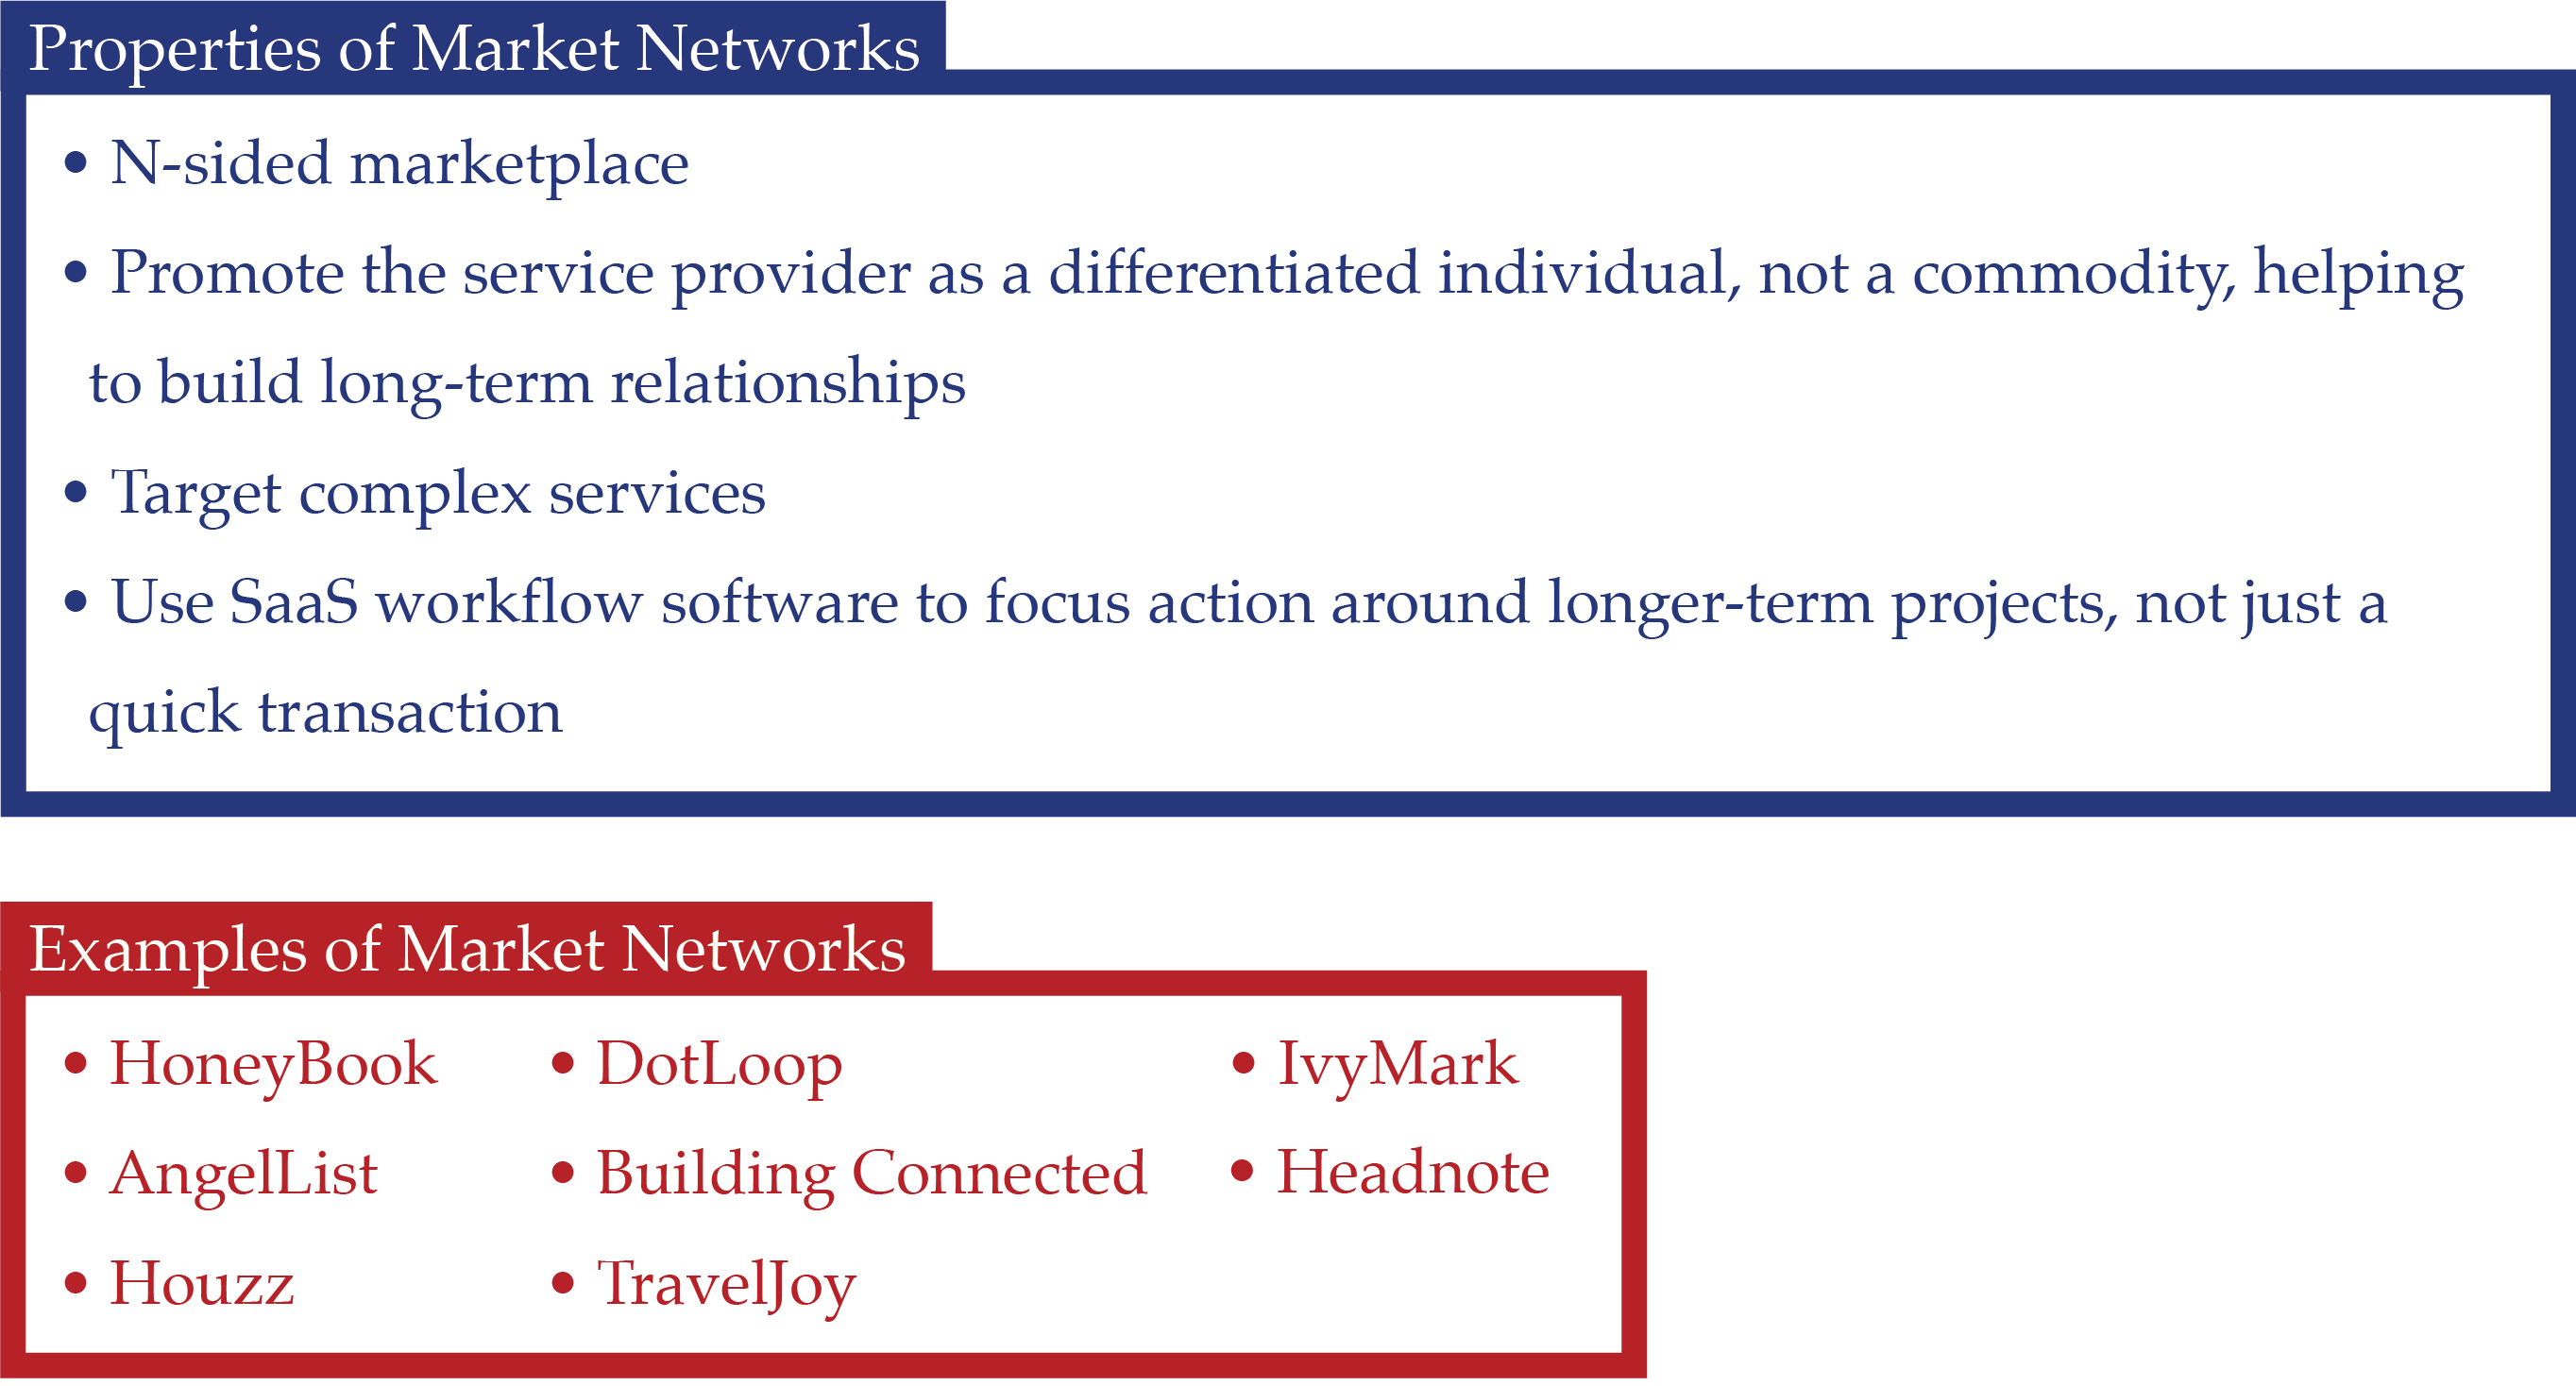 Properties and Example of Market Networks